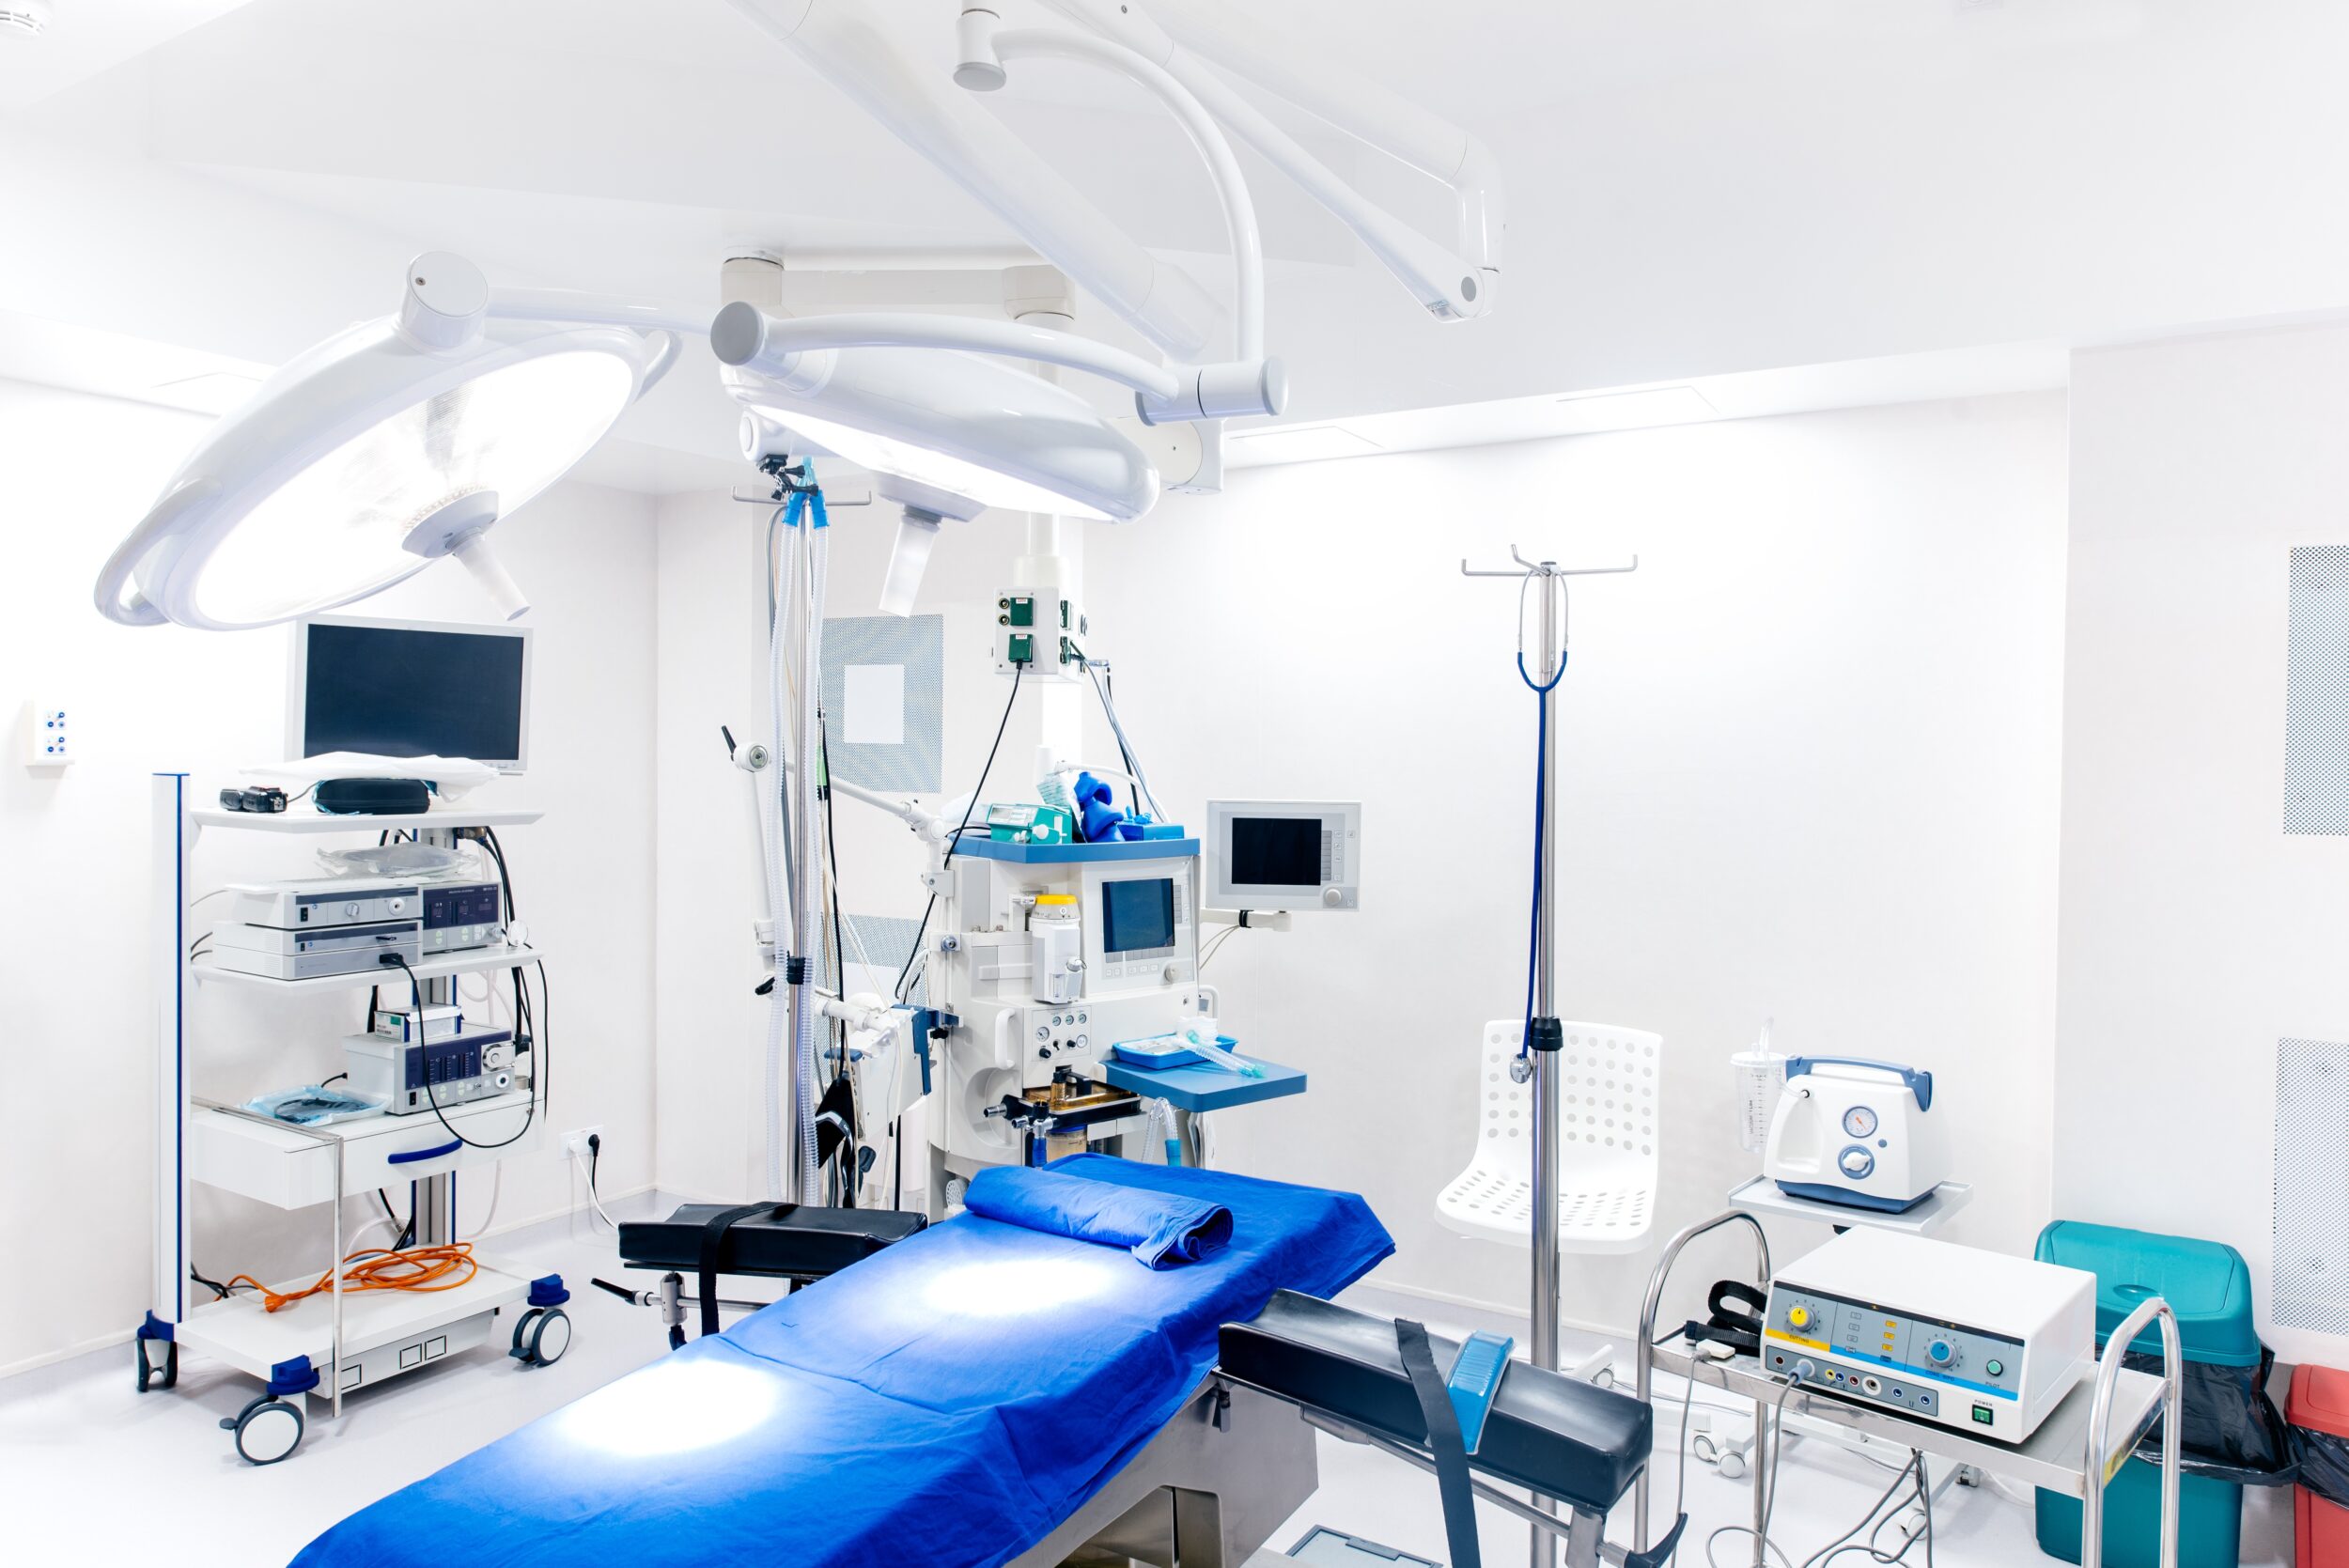 Medical devices and industrial lamps in surgery room of modern hospital